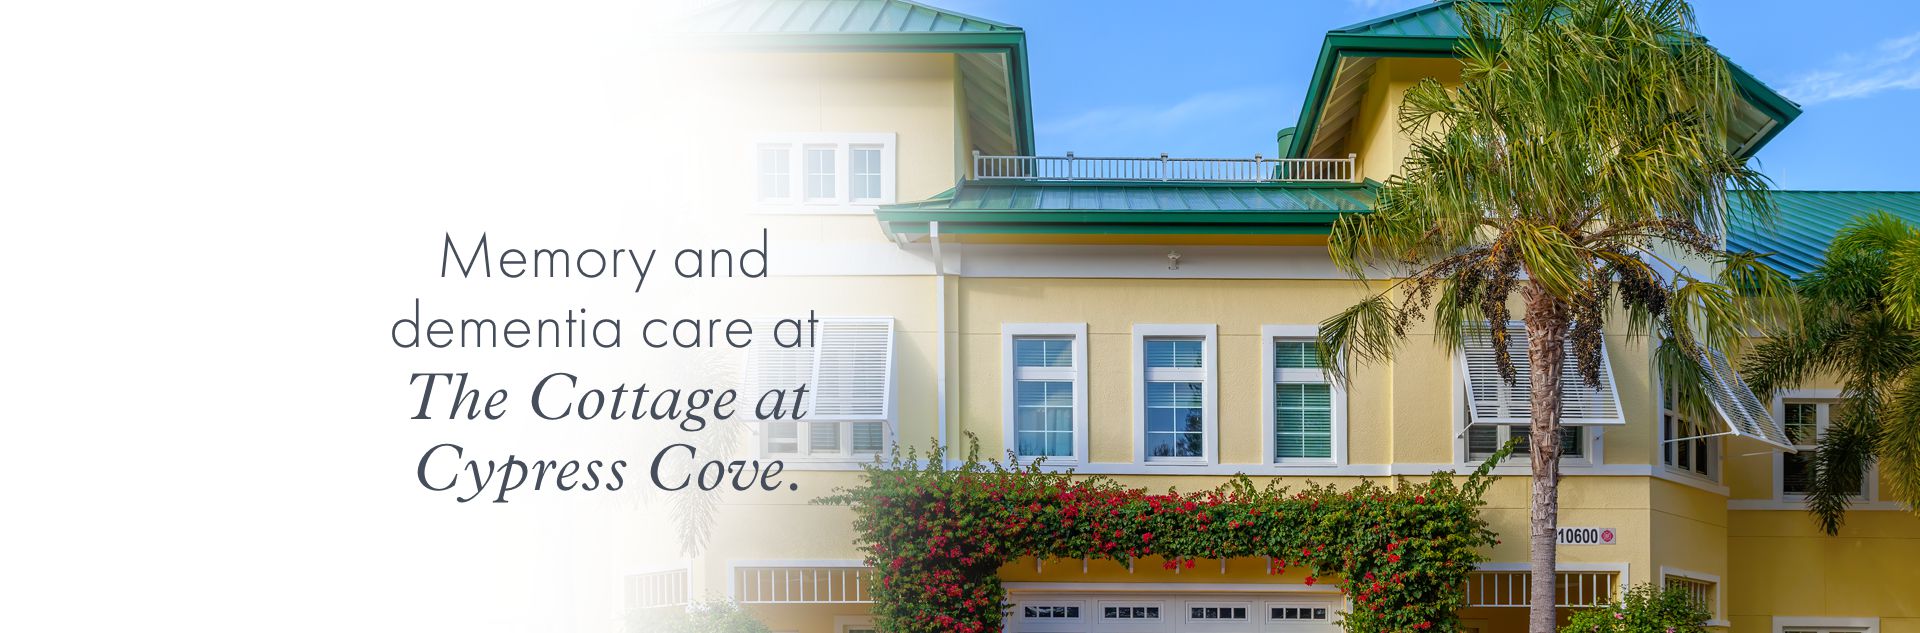 Memory and dementia care at The Cottage at Cypress Cove.